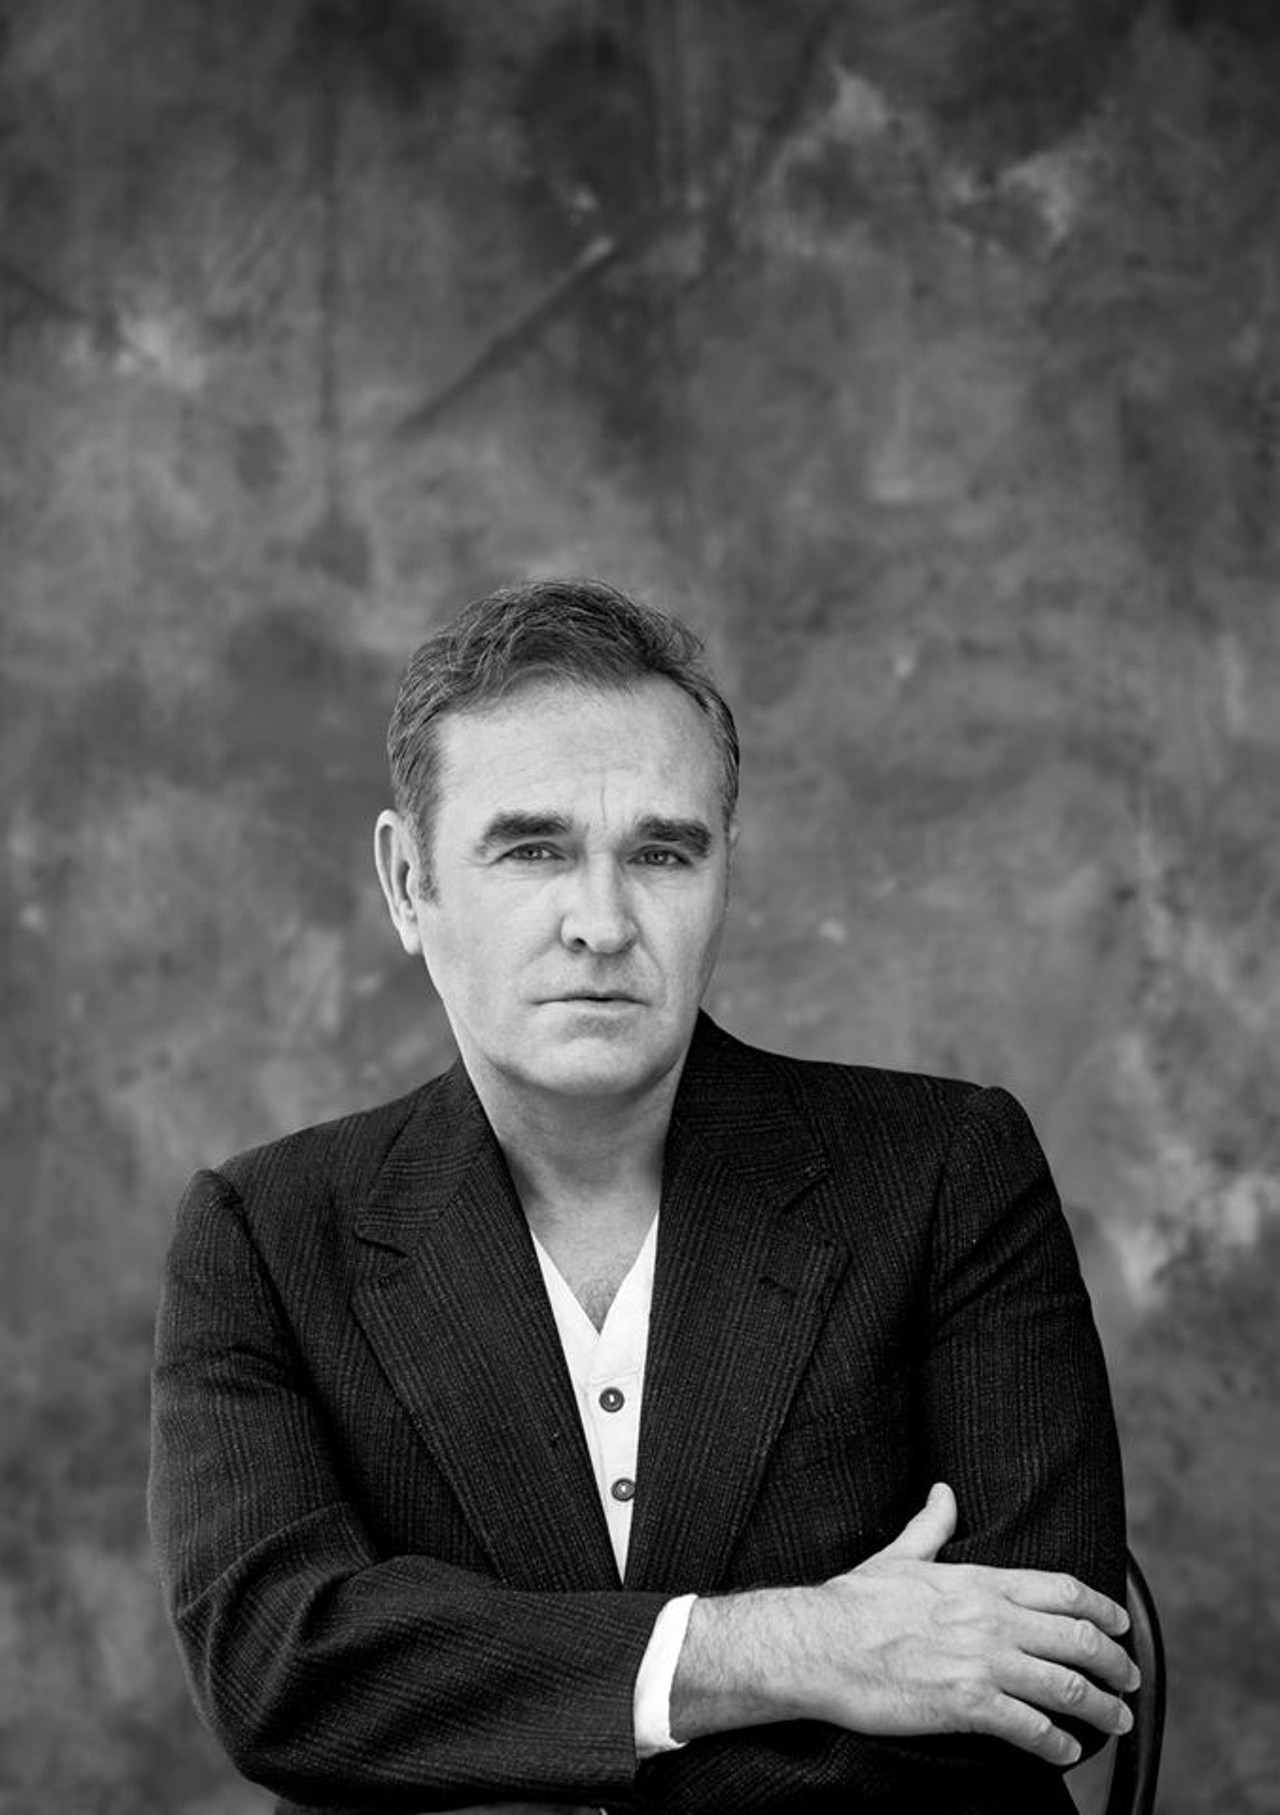 Morrissey, former lead singer of The Smiths, is coming to town at the Fillmore on Tuesday, November 28. Join the British cultural icon as him and his band electrify the stage. Doors open at 7:00 p.m. Tickets start at $45. Photo courtesy of Facebook.